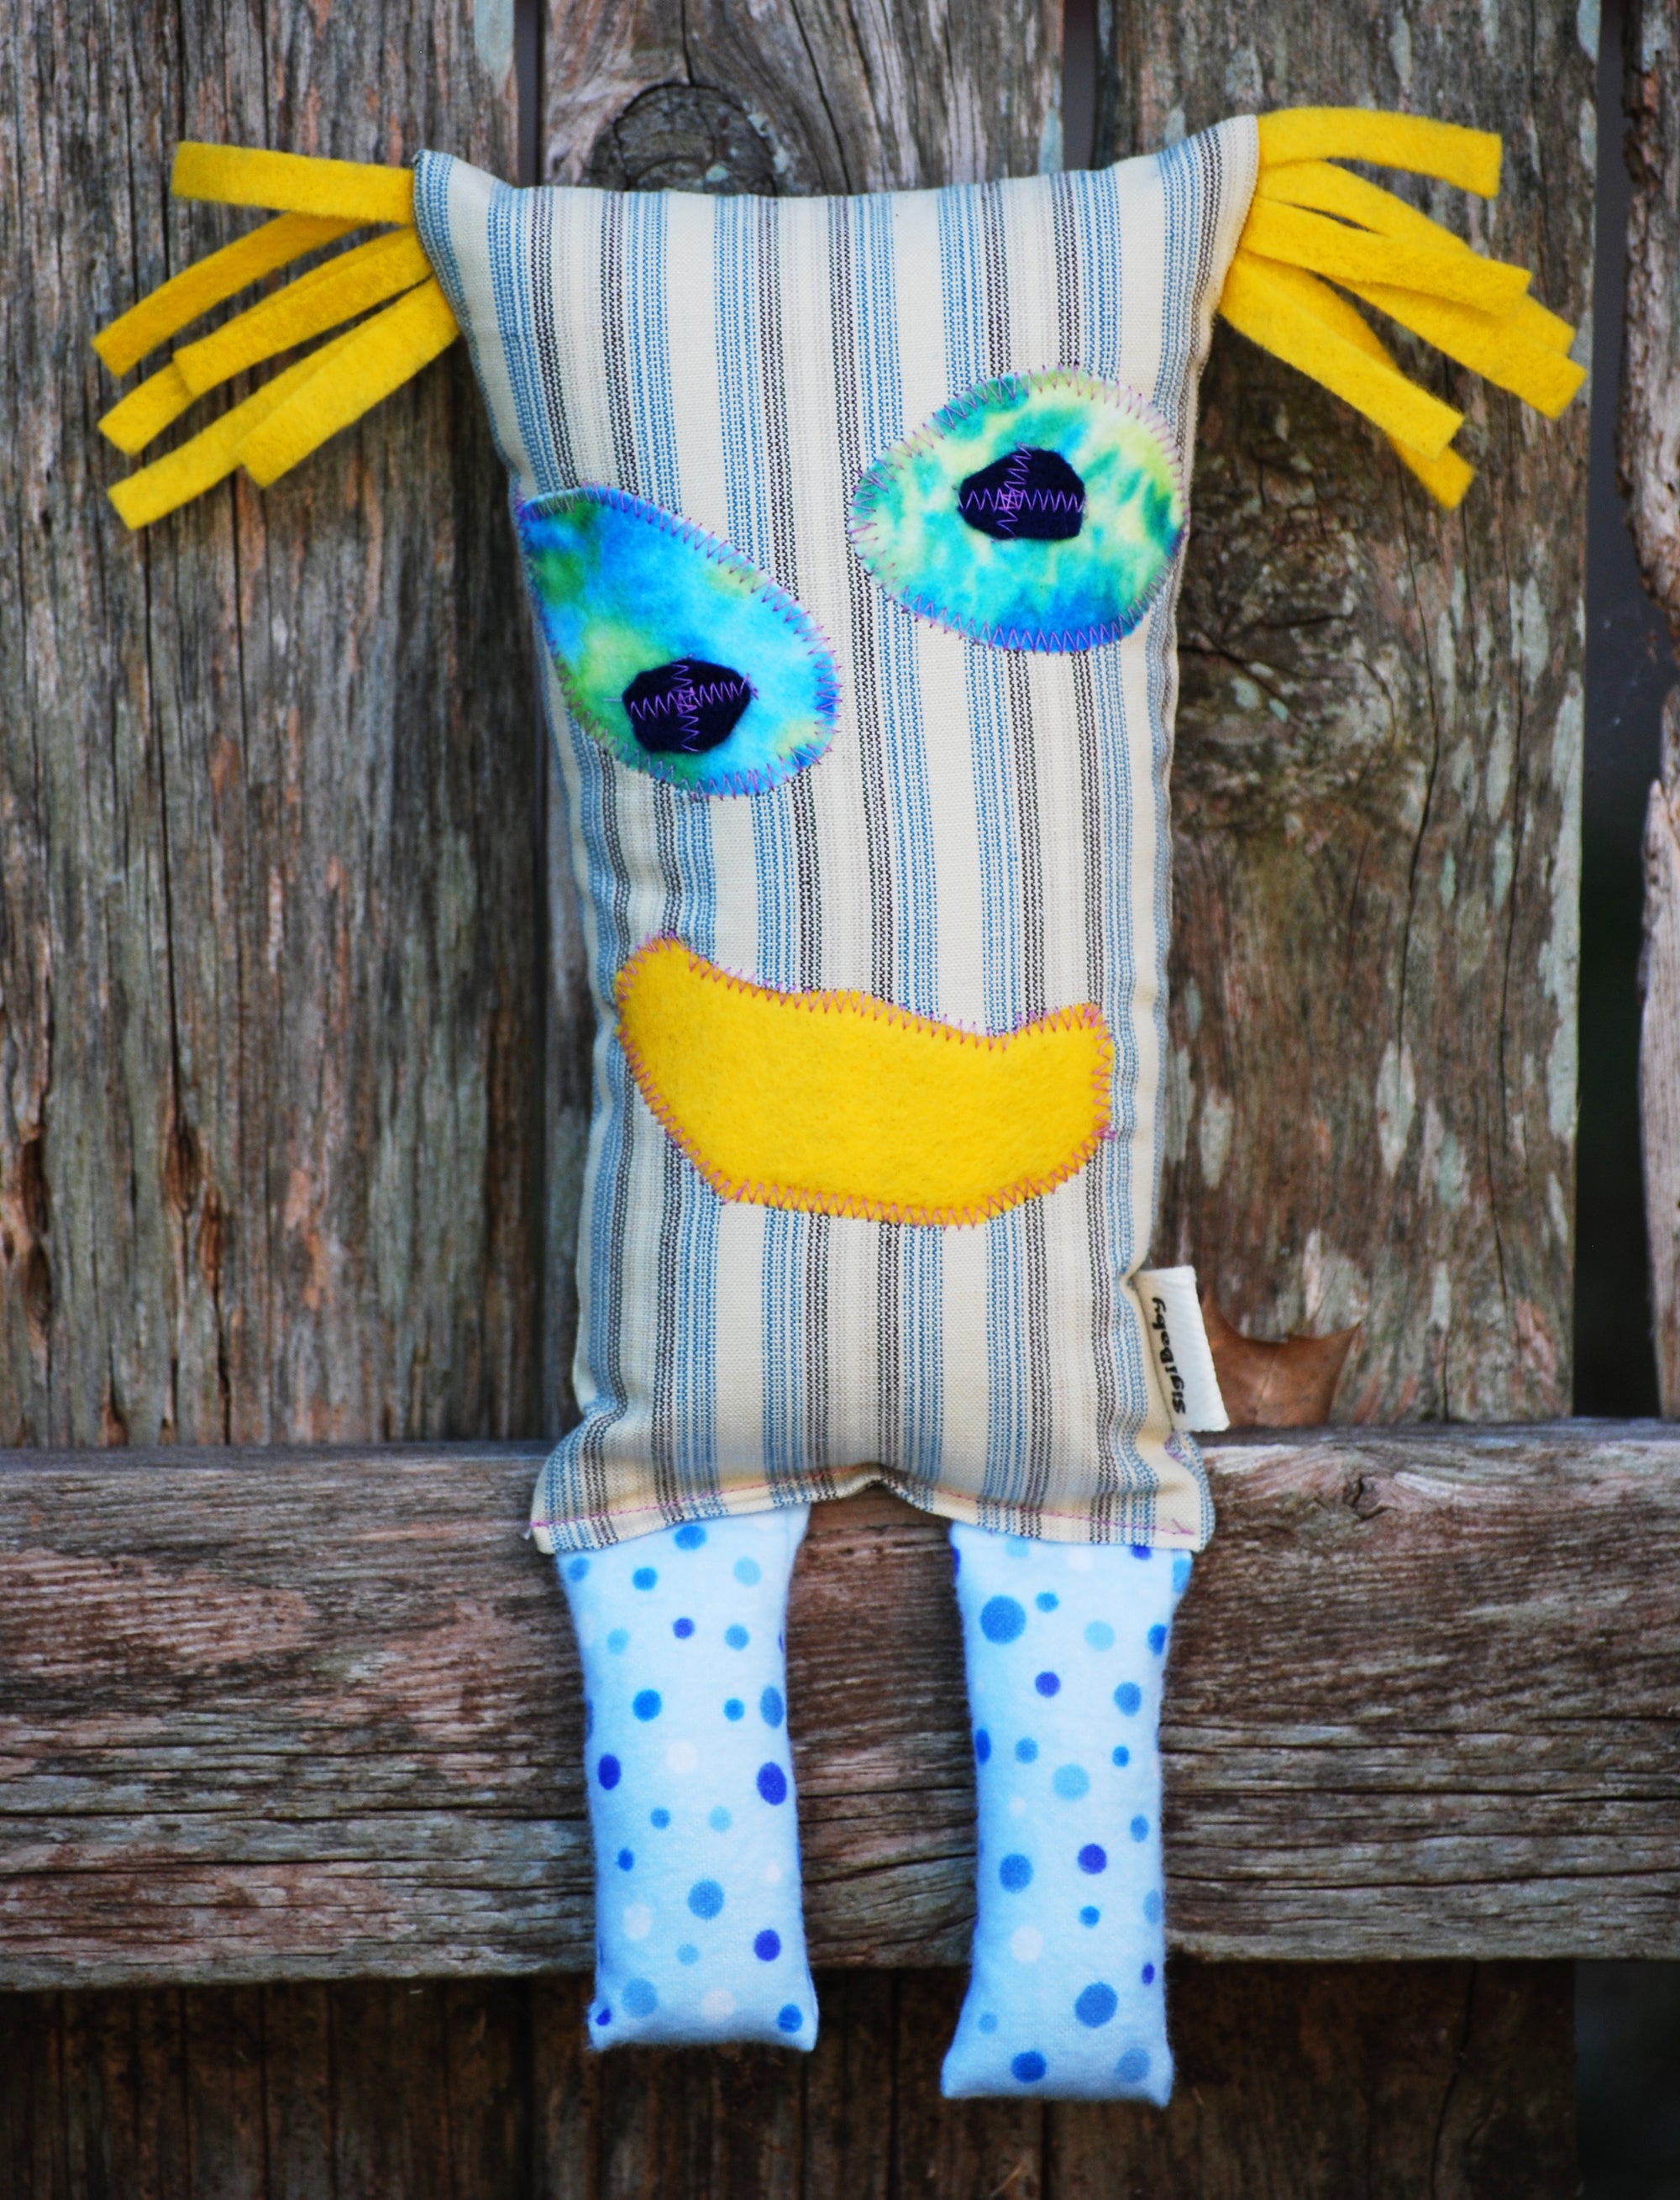 Little Monster "Fritz" Handmade Recycled Fabric Plush Toy Doll